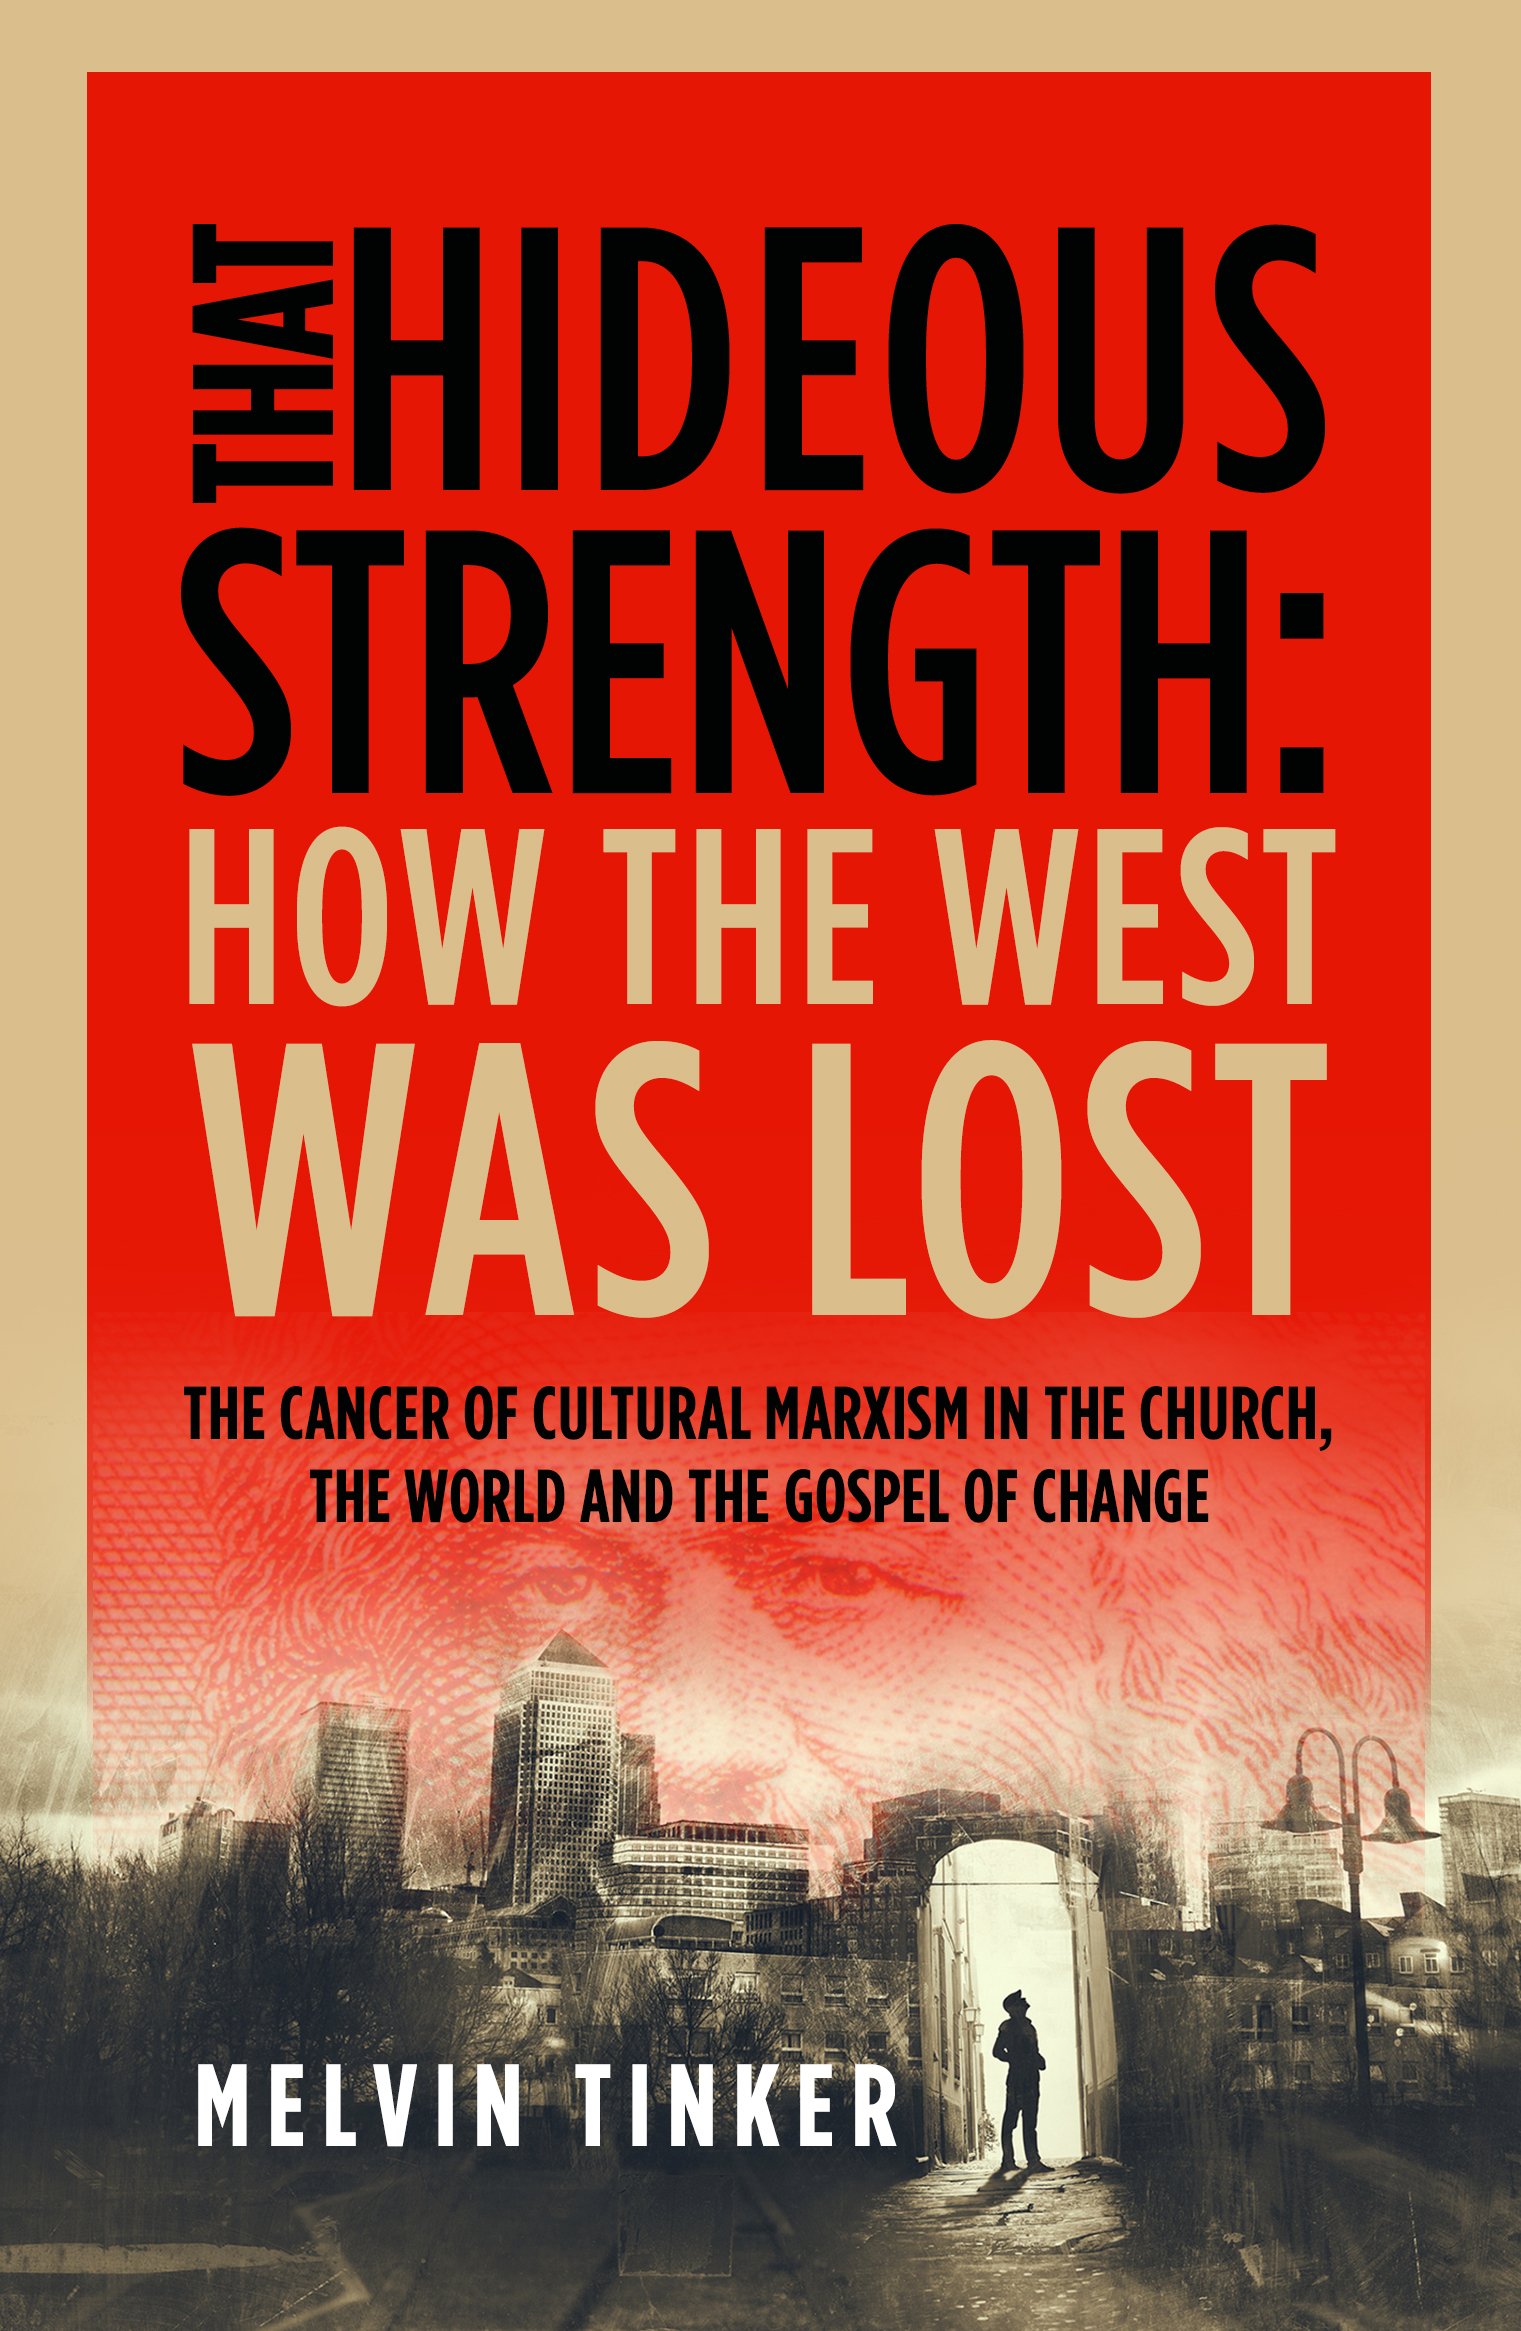 Book Notice: THAT HIDEOUS STRENGTH: HOW THE WEST WAS LOST, by Melvin Tinker